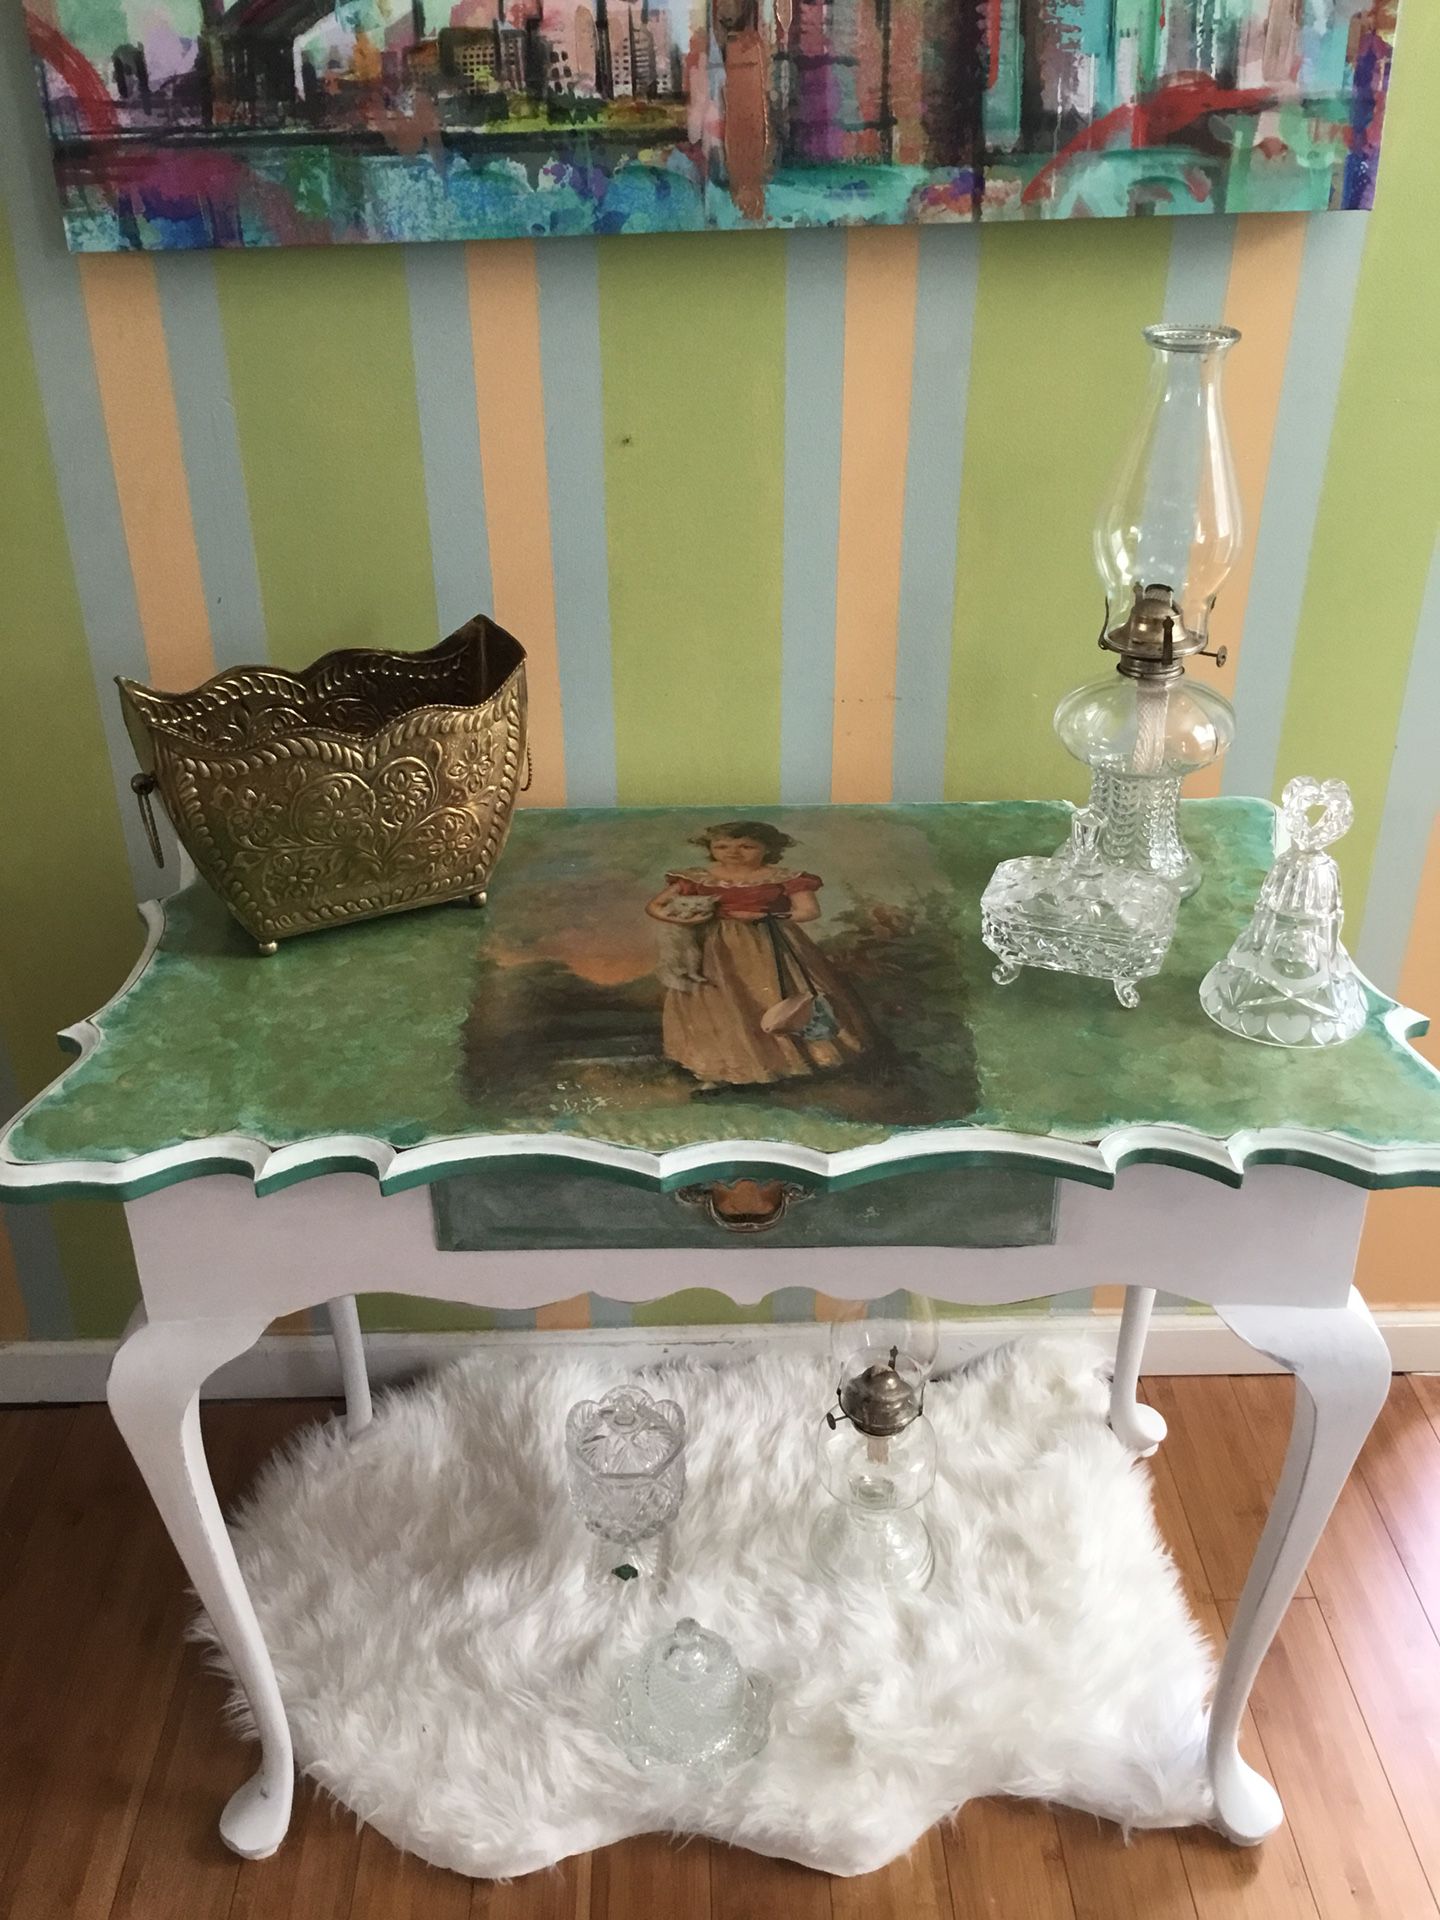 Antique goat feet table, hand painted in the decoupage technique.. Beautiful!